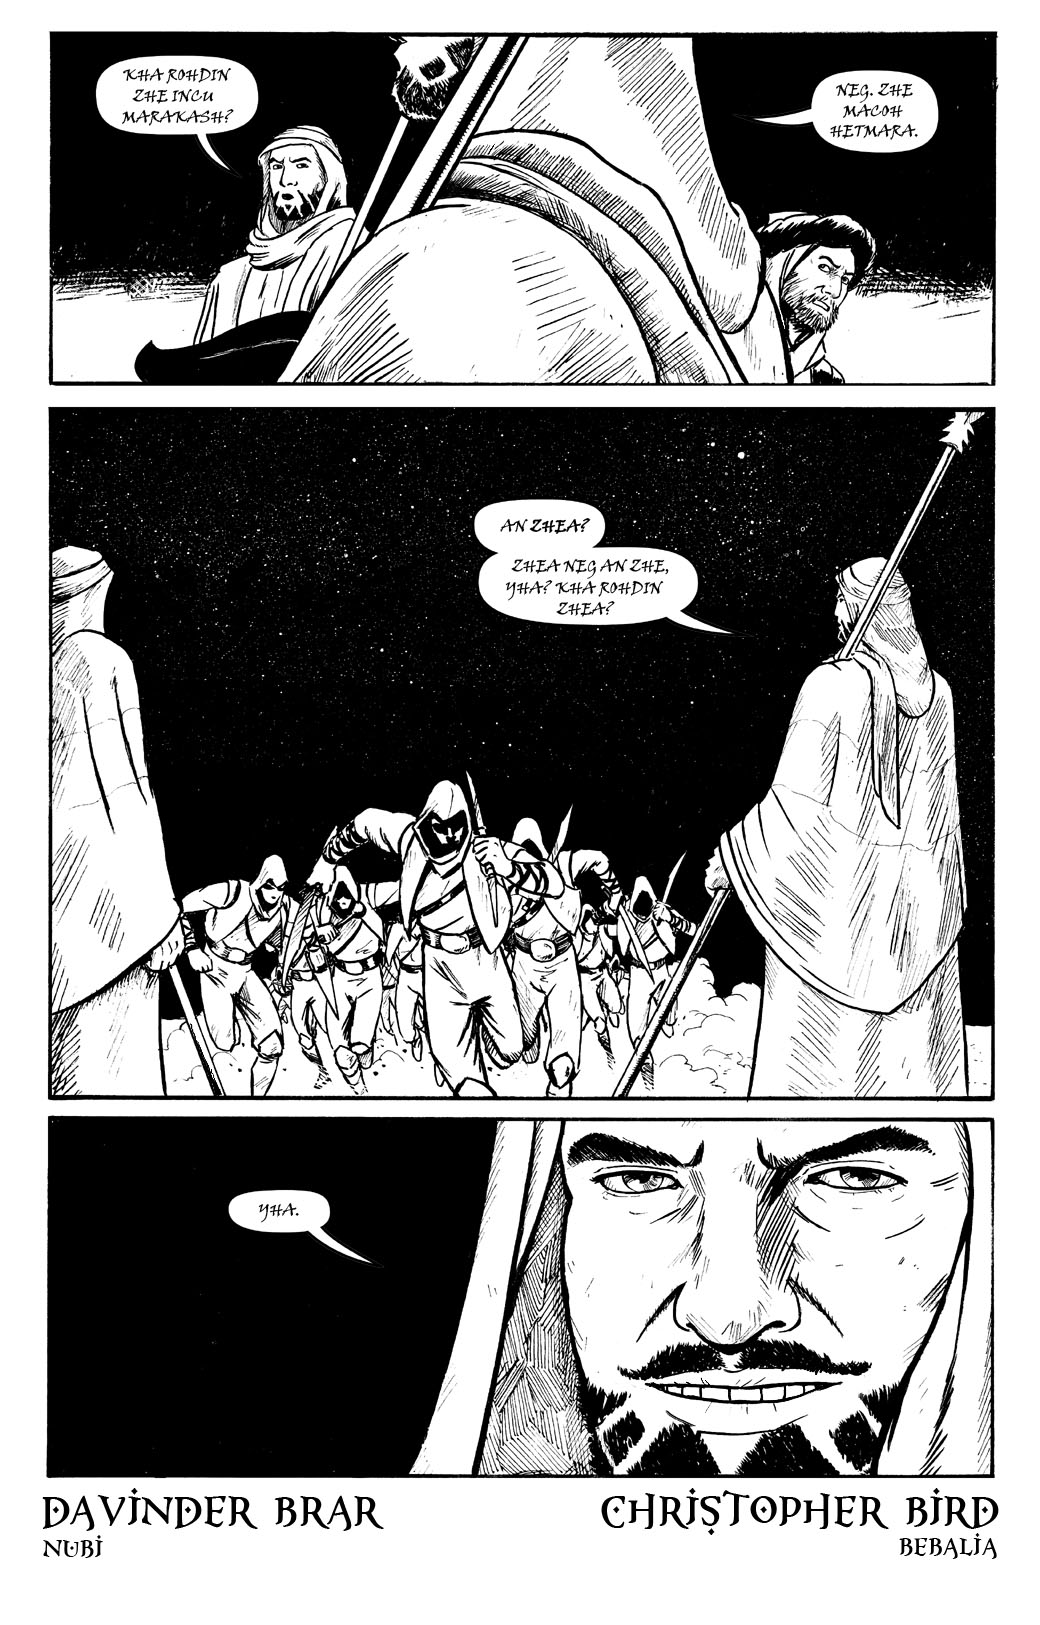 Book 4, page 22